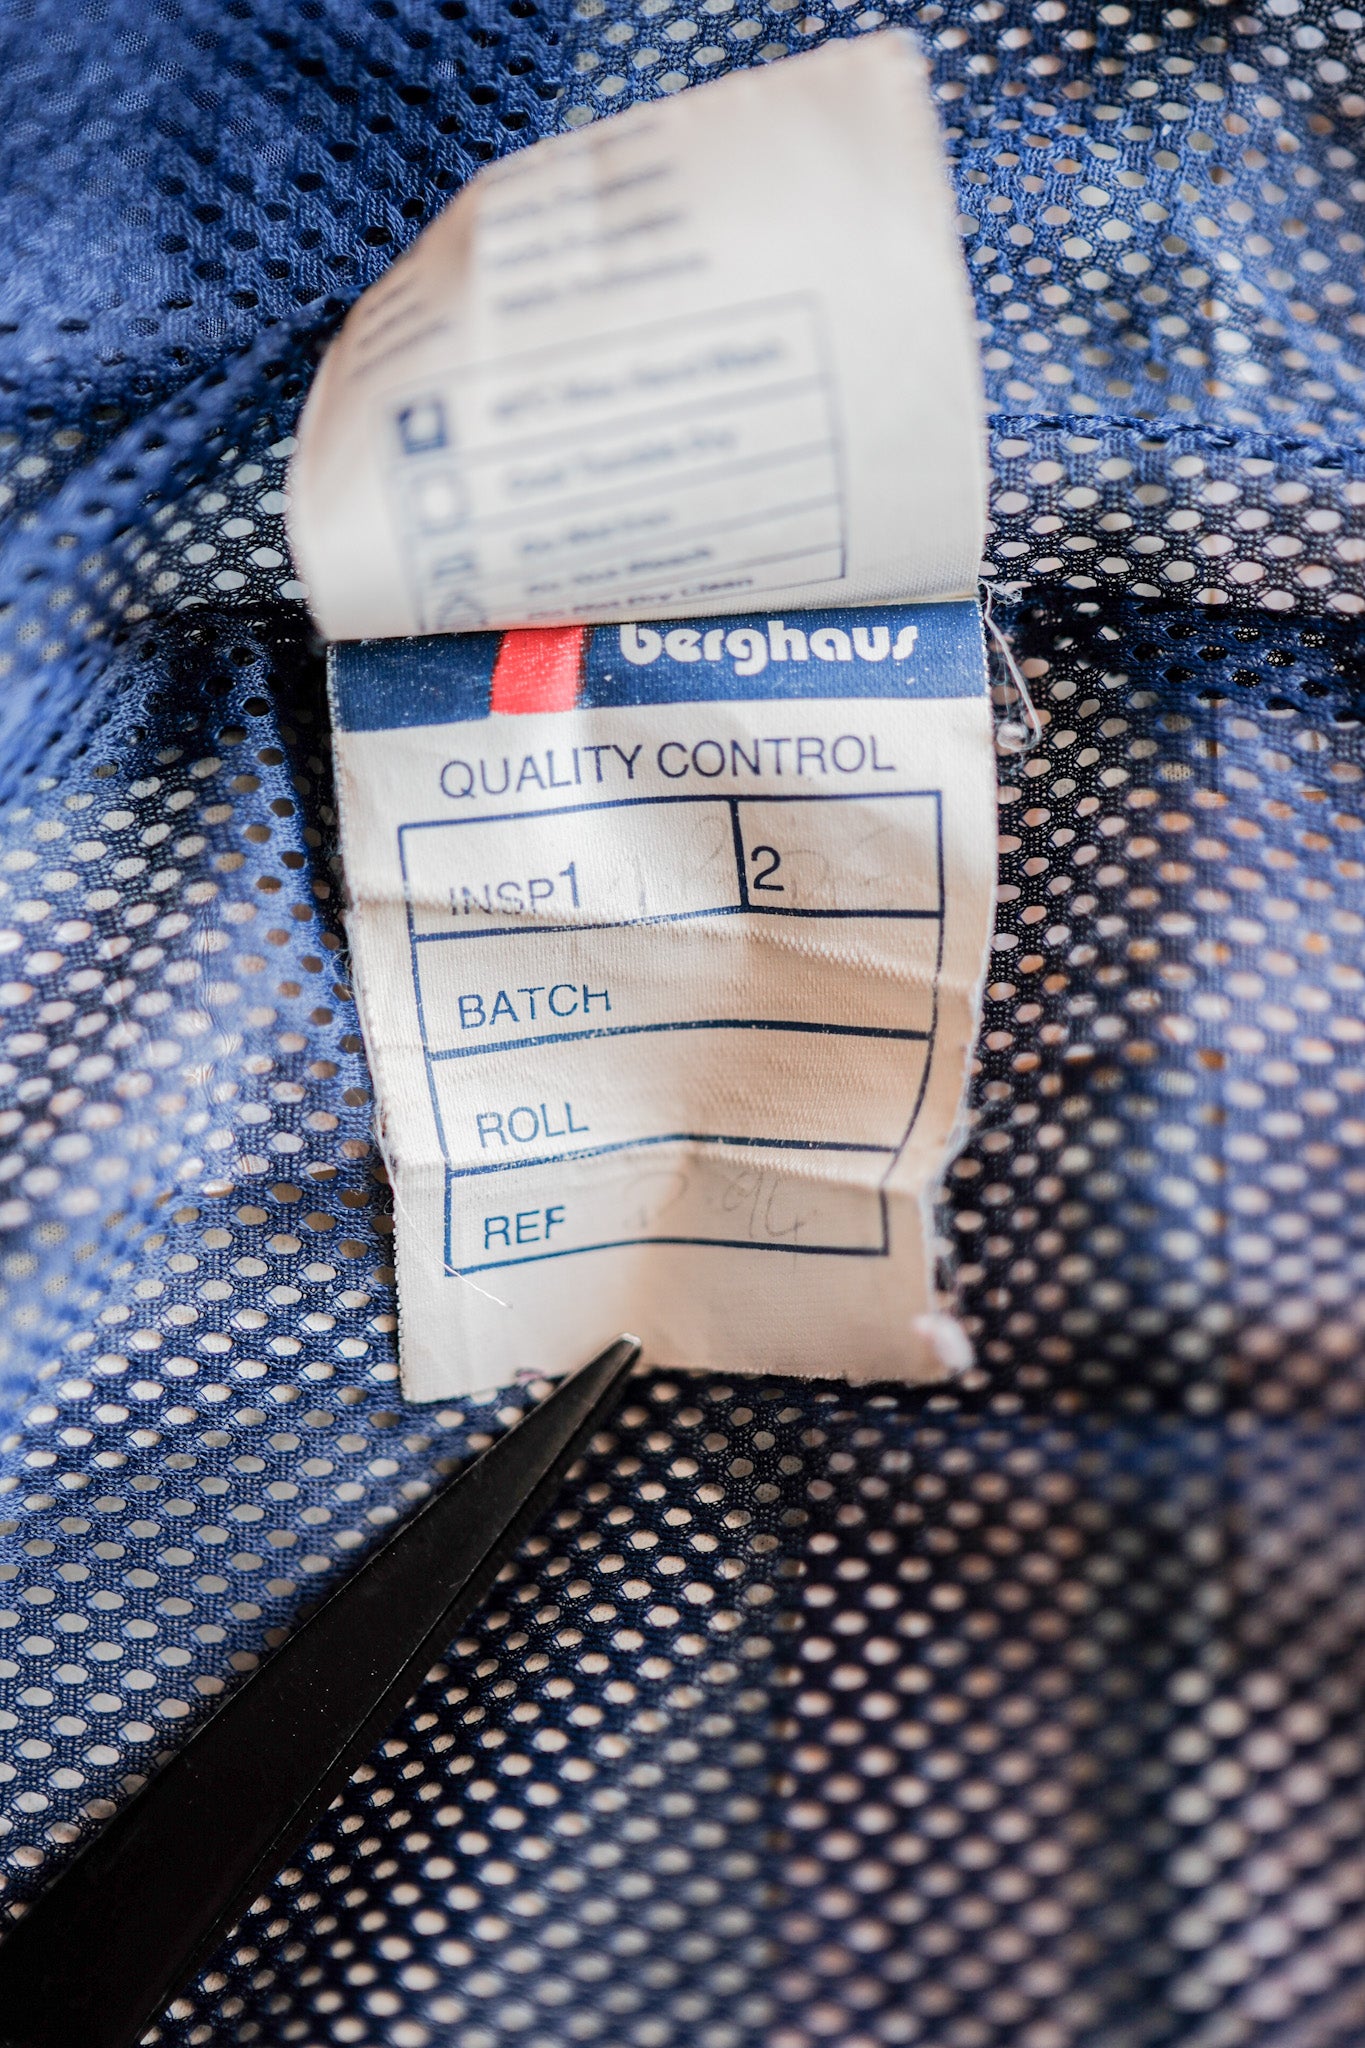 [~ 90's] Vintage BERGHAUS GORE-TEX HIKING JACKET SIZE.SMALL